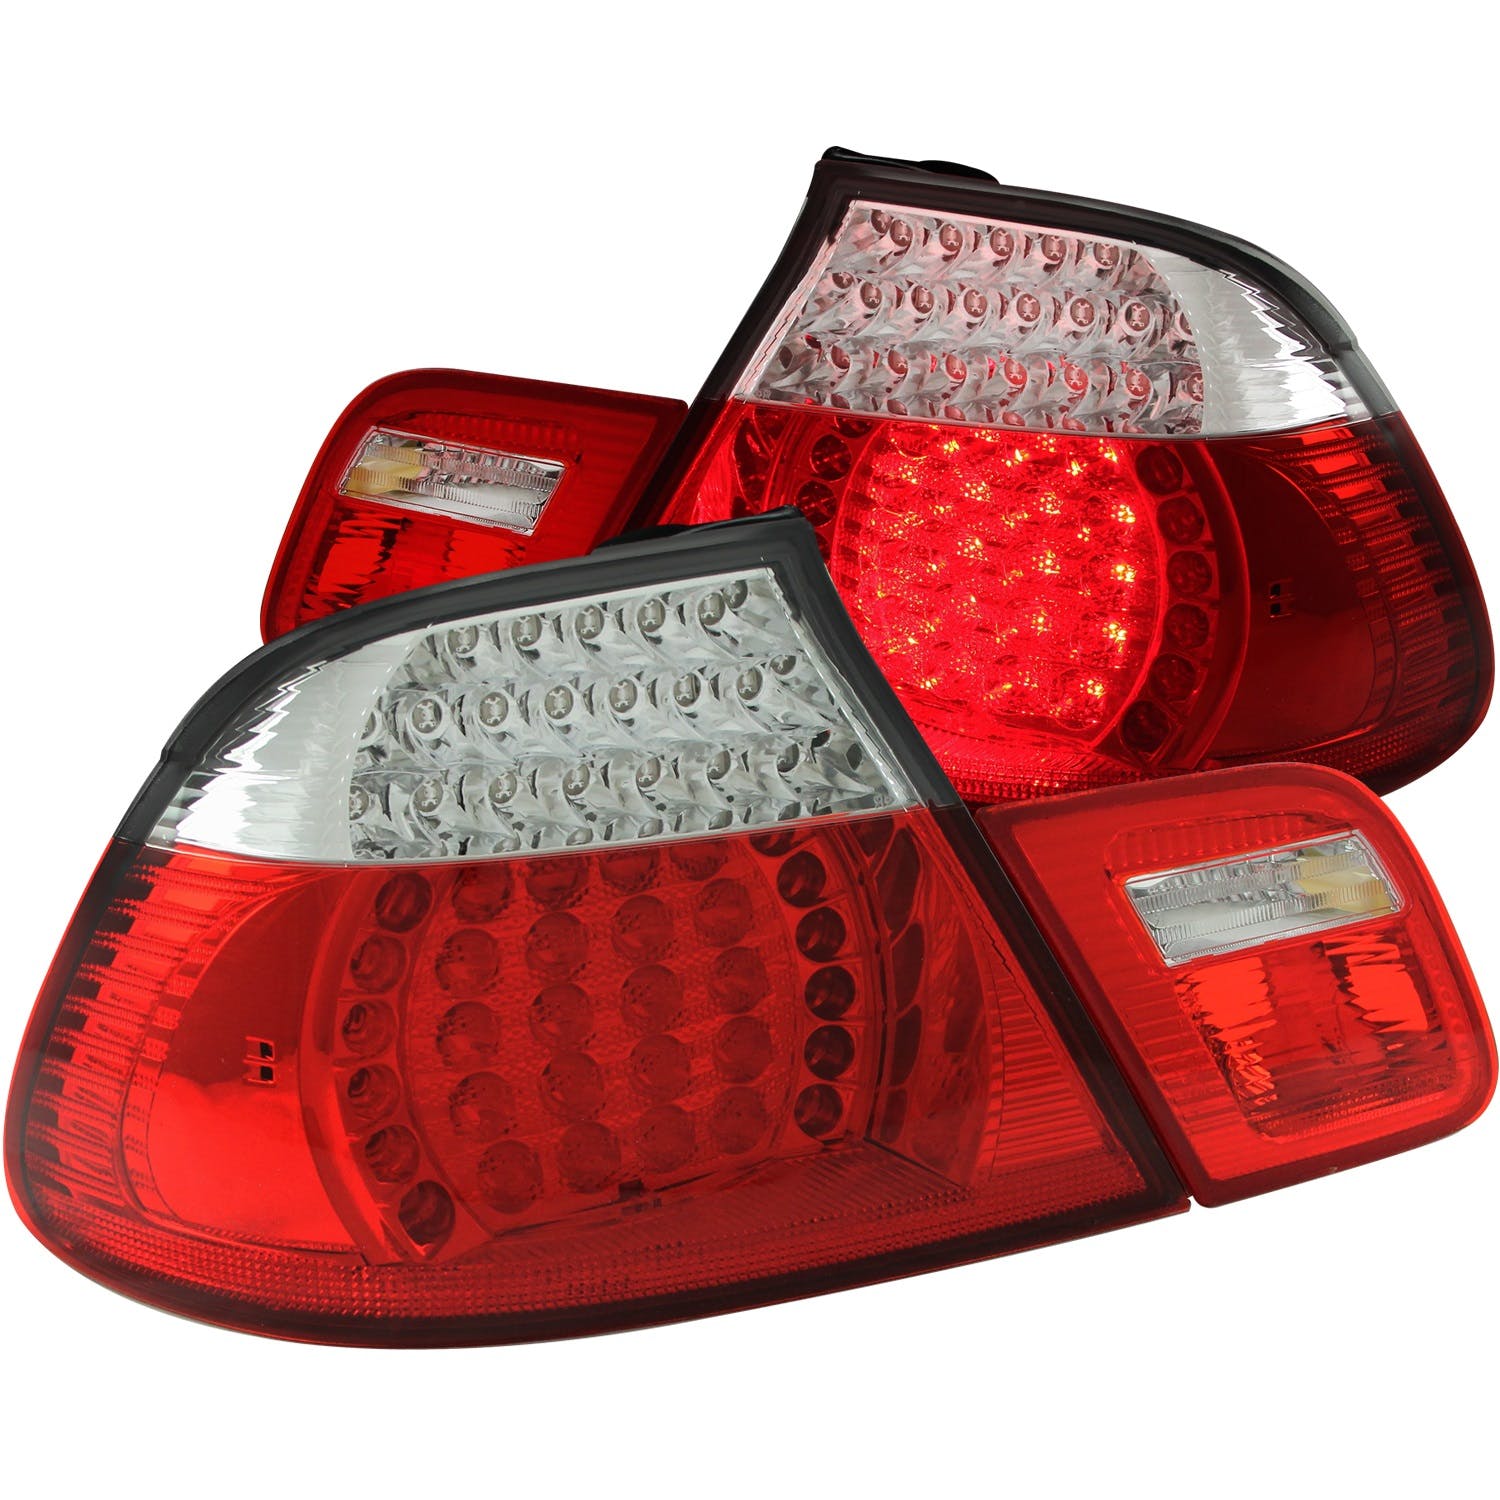 AnzoUSA 321185 LED Taillights Red Clear 4pc